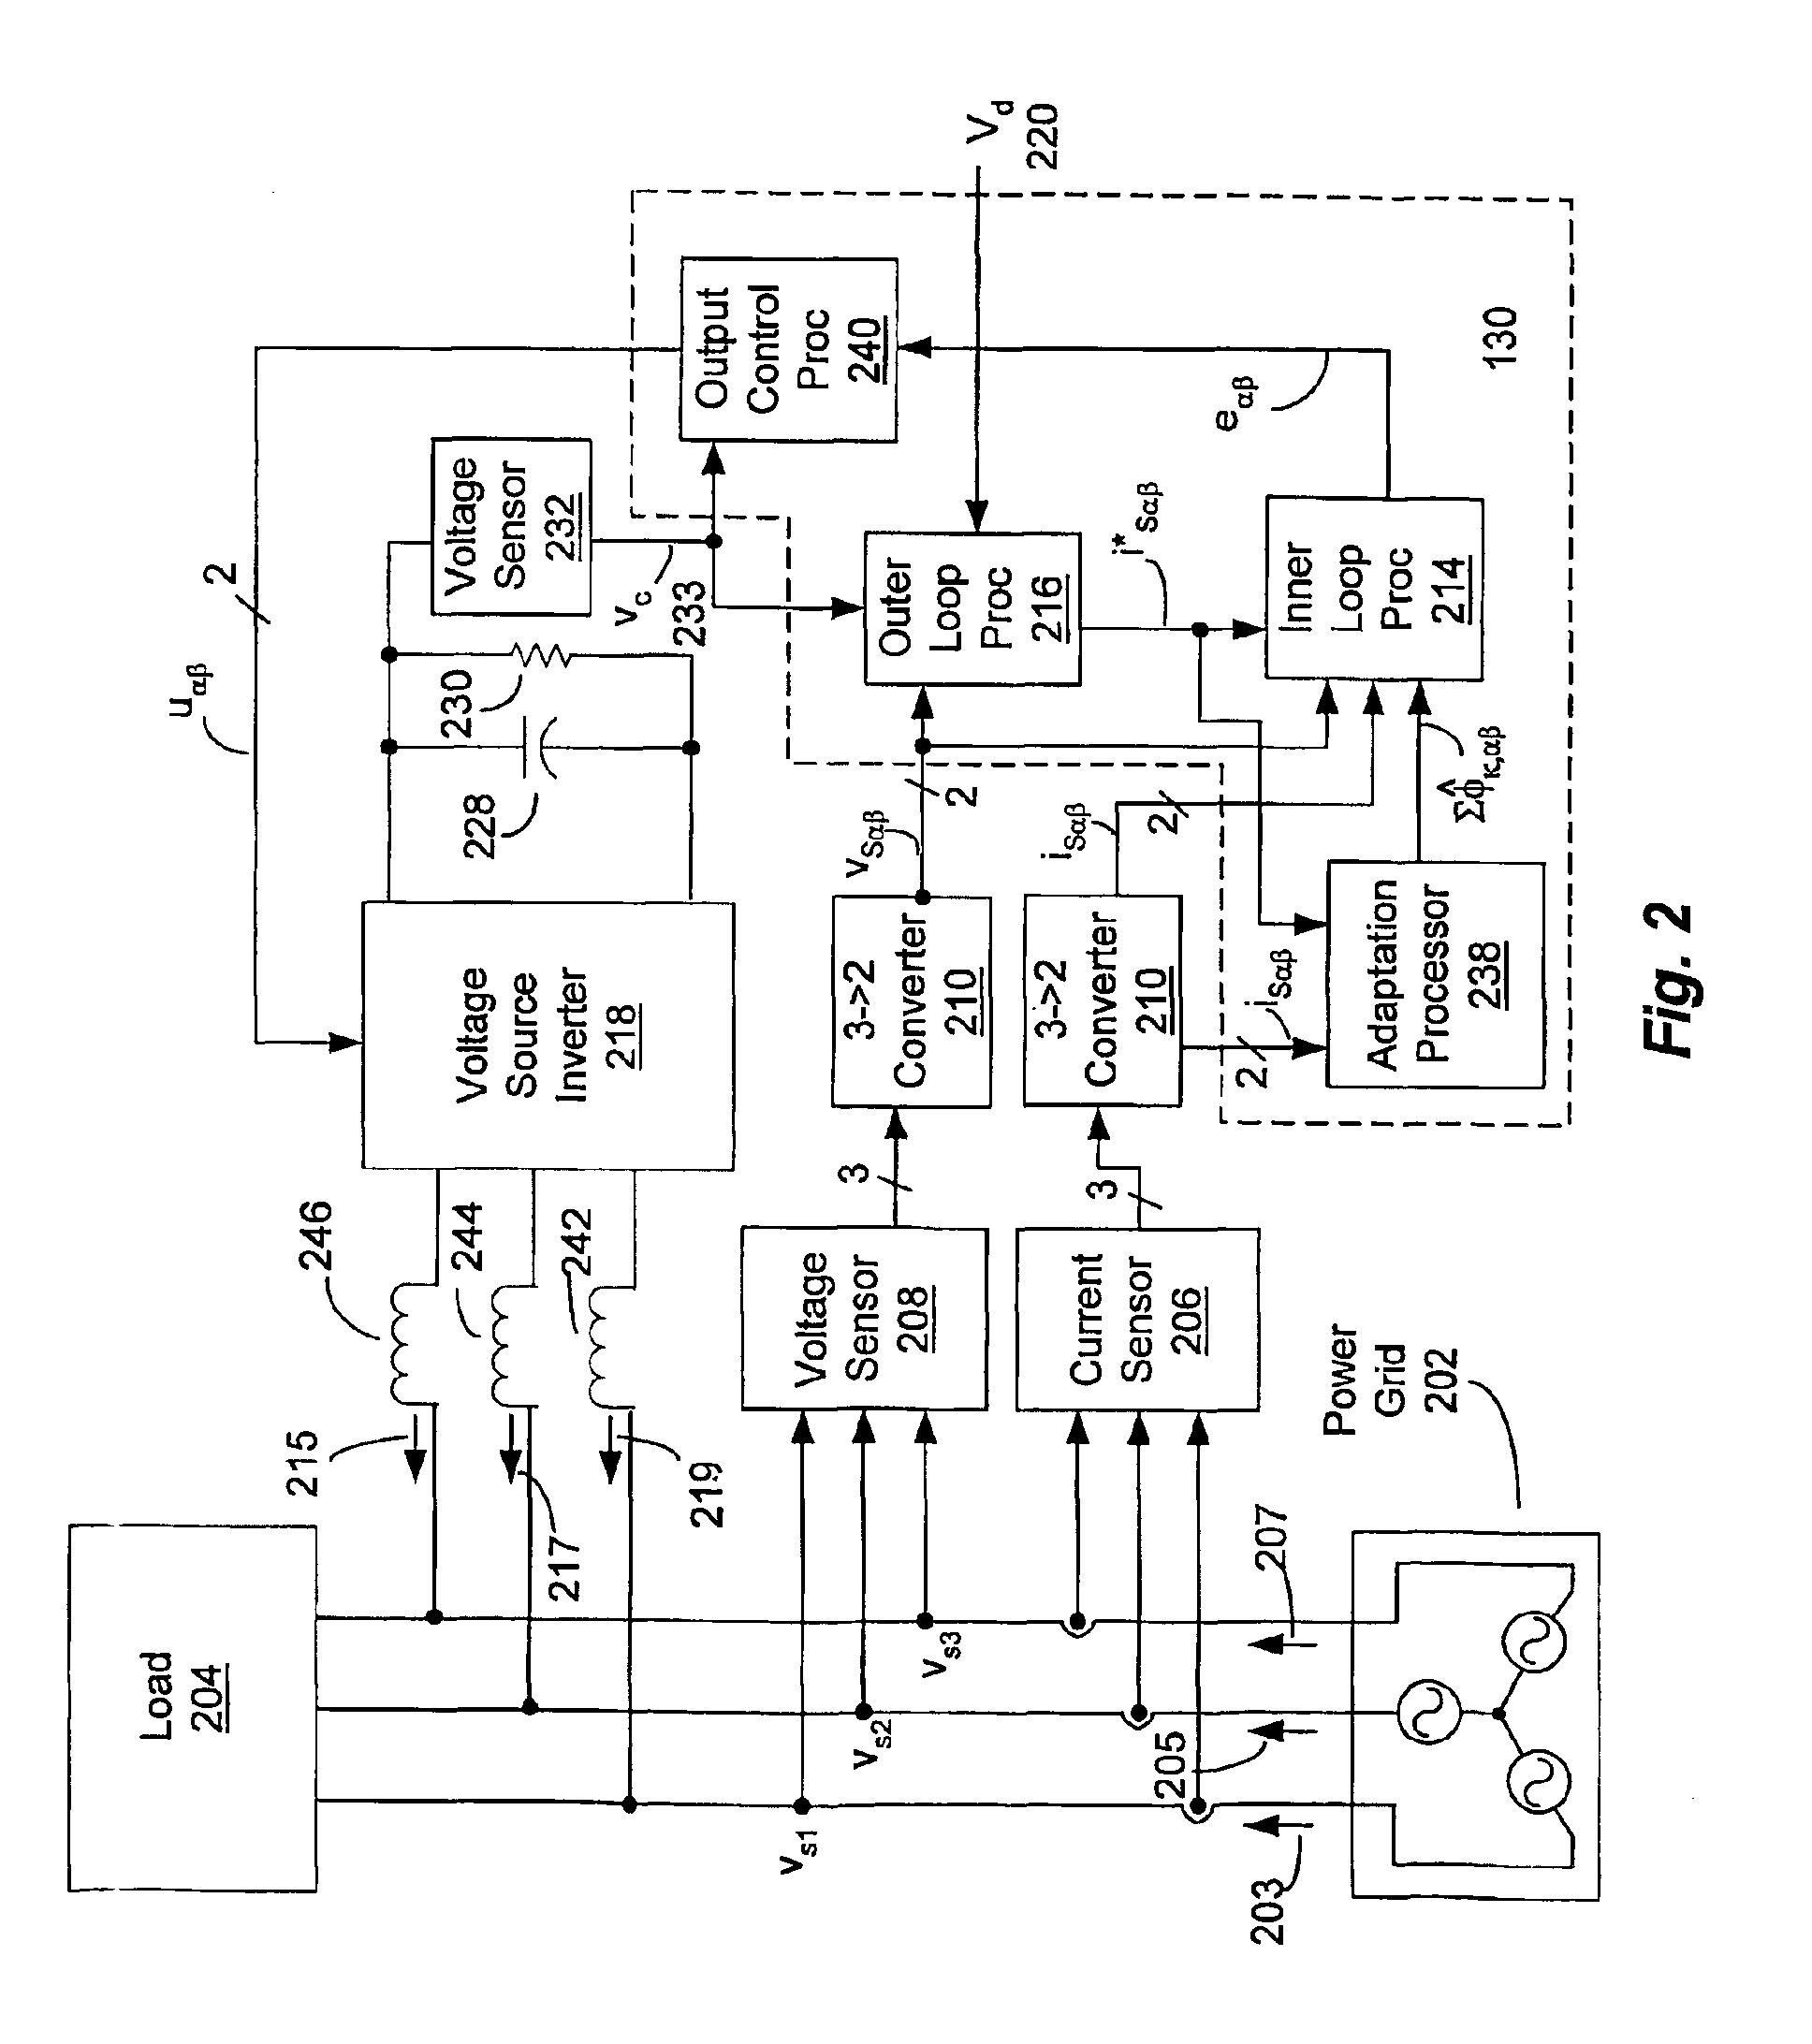 Adaptive controller for d-statcom in the stationary reference frame to compensate for reactive and harmonic distortion under unbalanced conditions